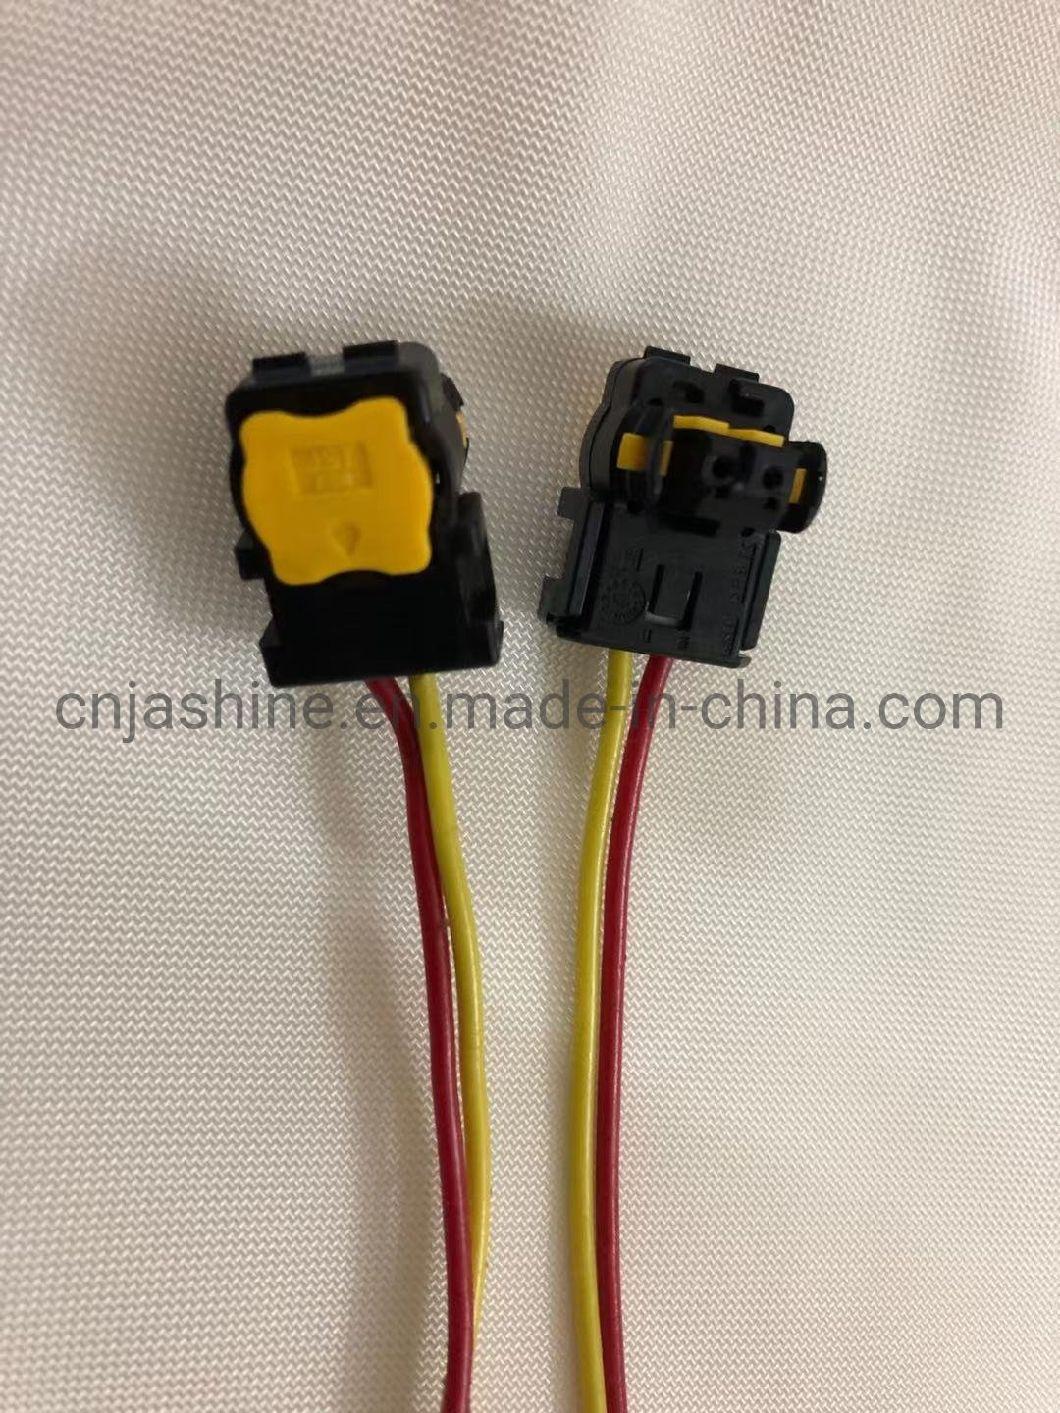 New Plug Wire Connector for Drvier Airbag (JASSE22)